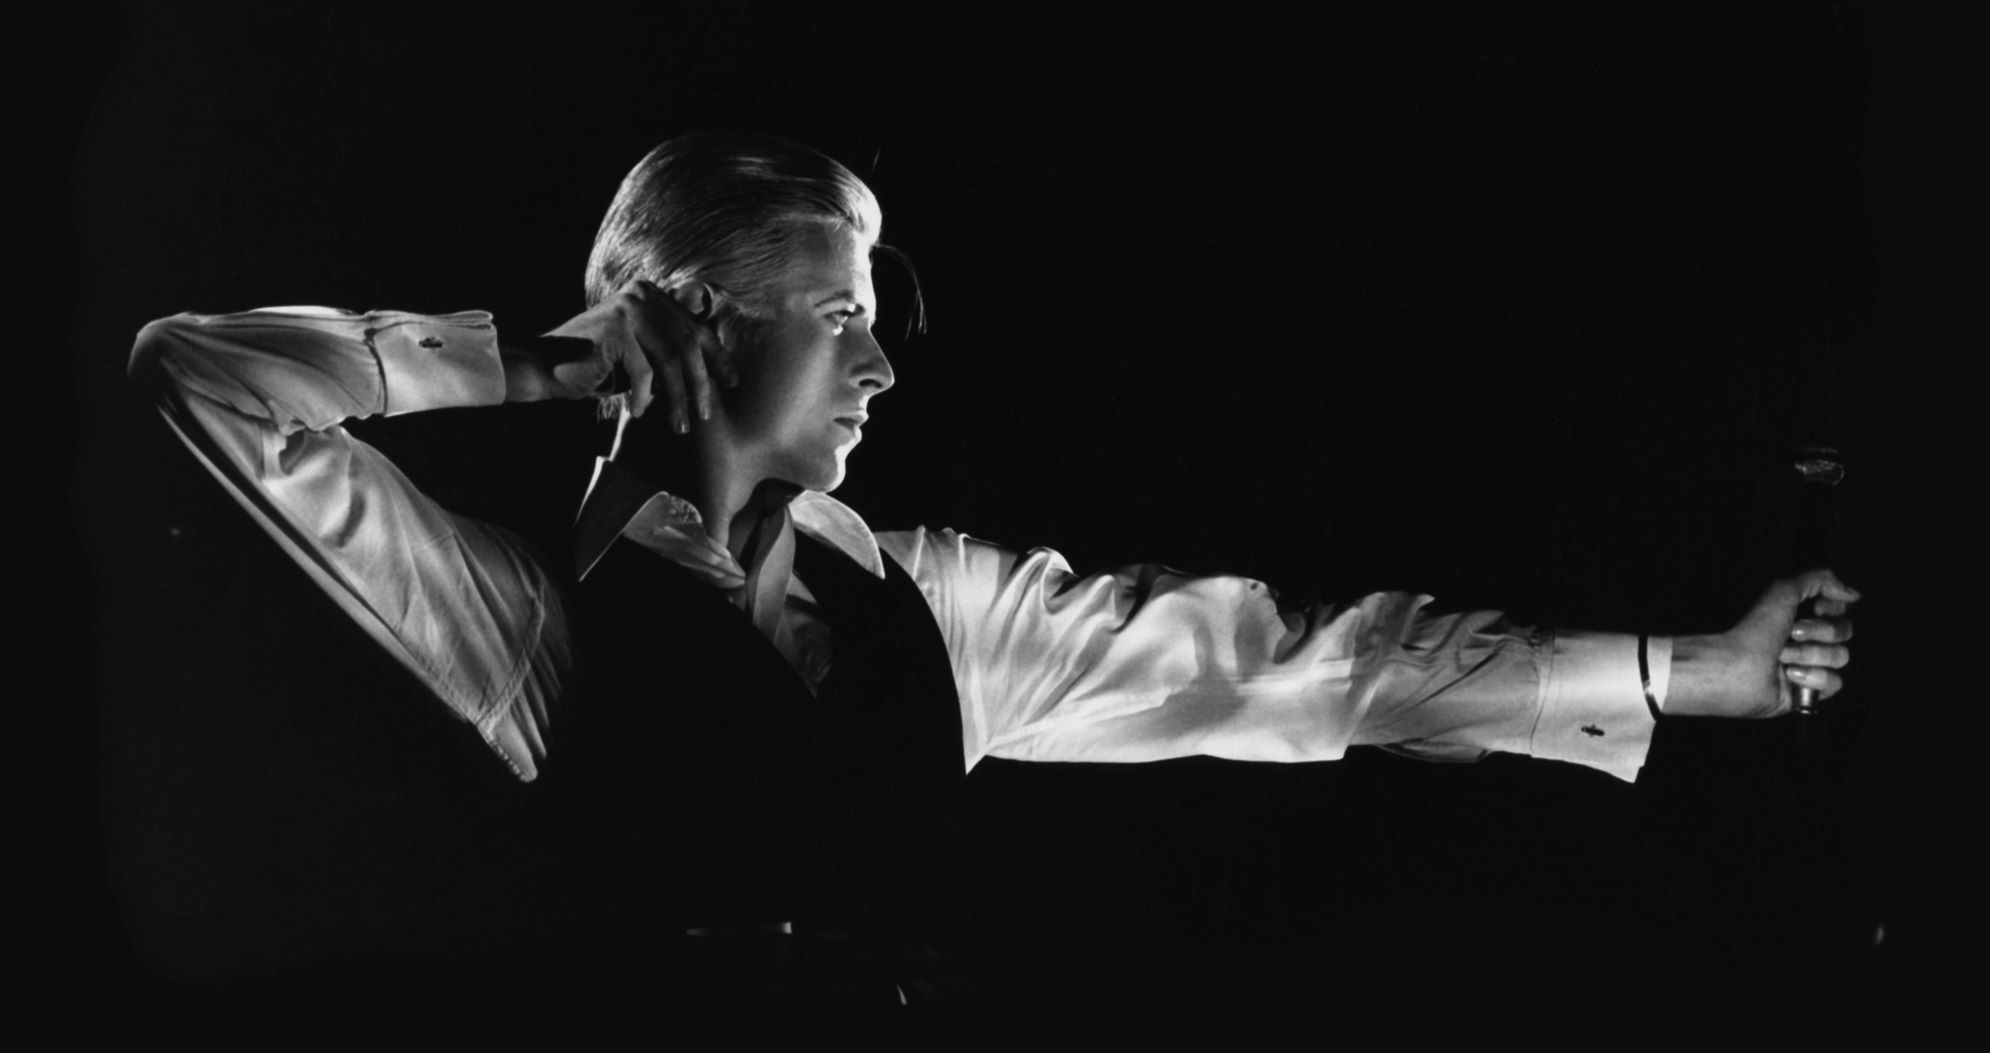 David Bowie as The Thin White Duke, Station to Station Tour, 1976 © John Robert Rowlands1